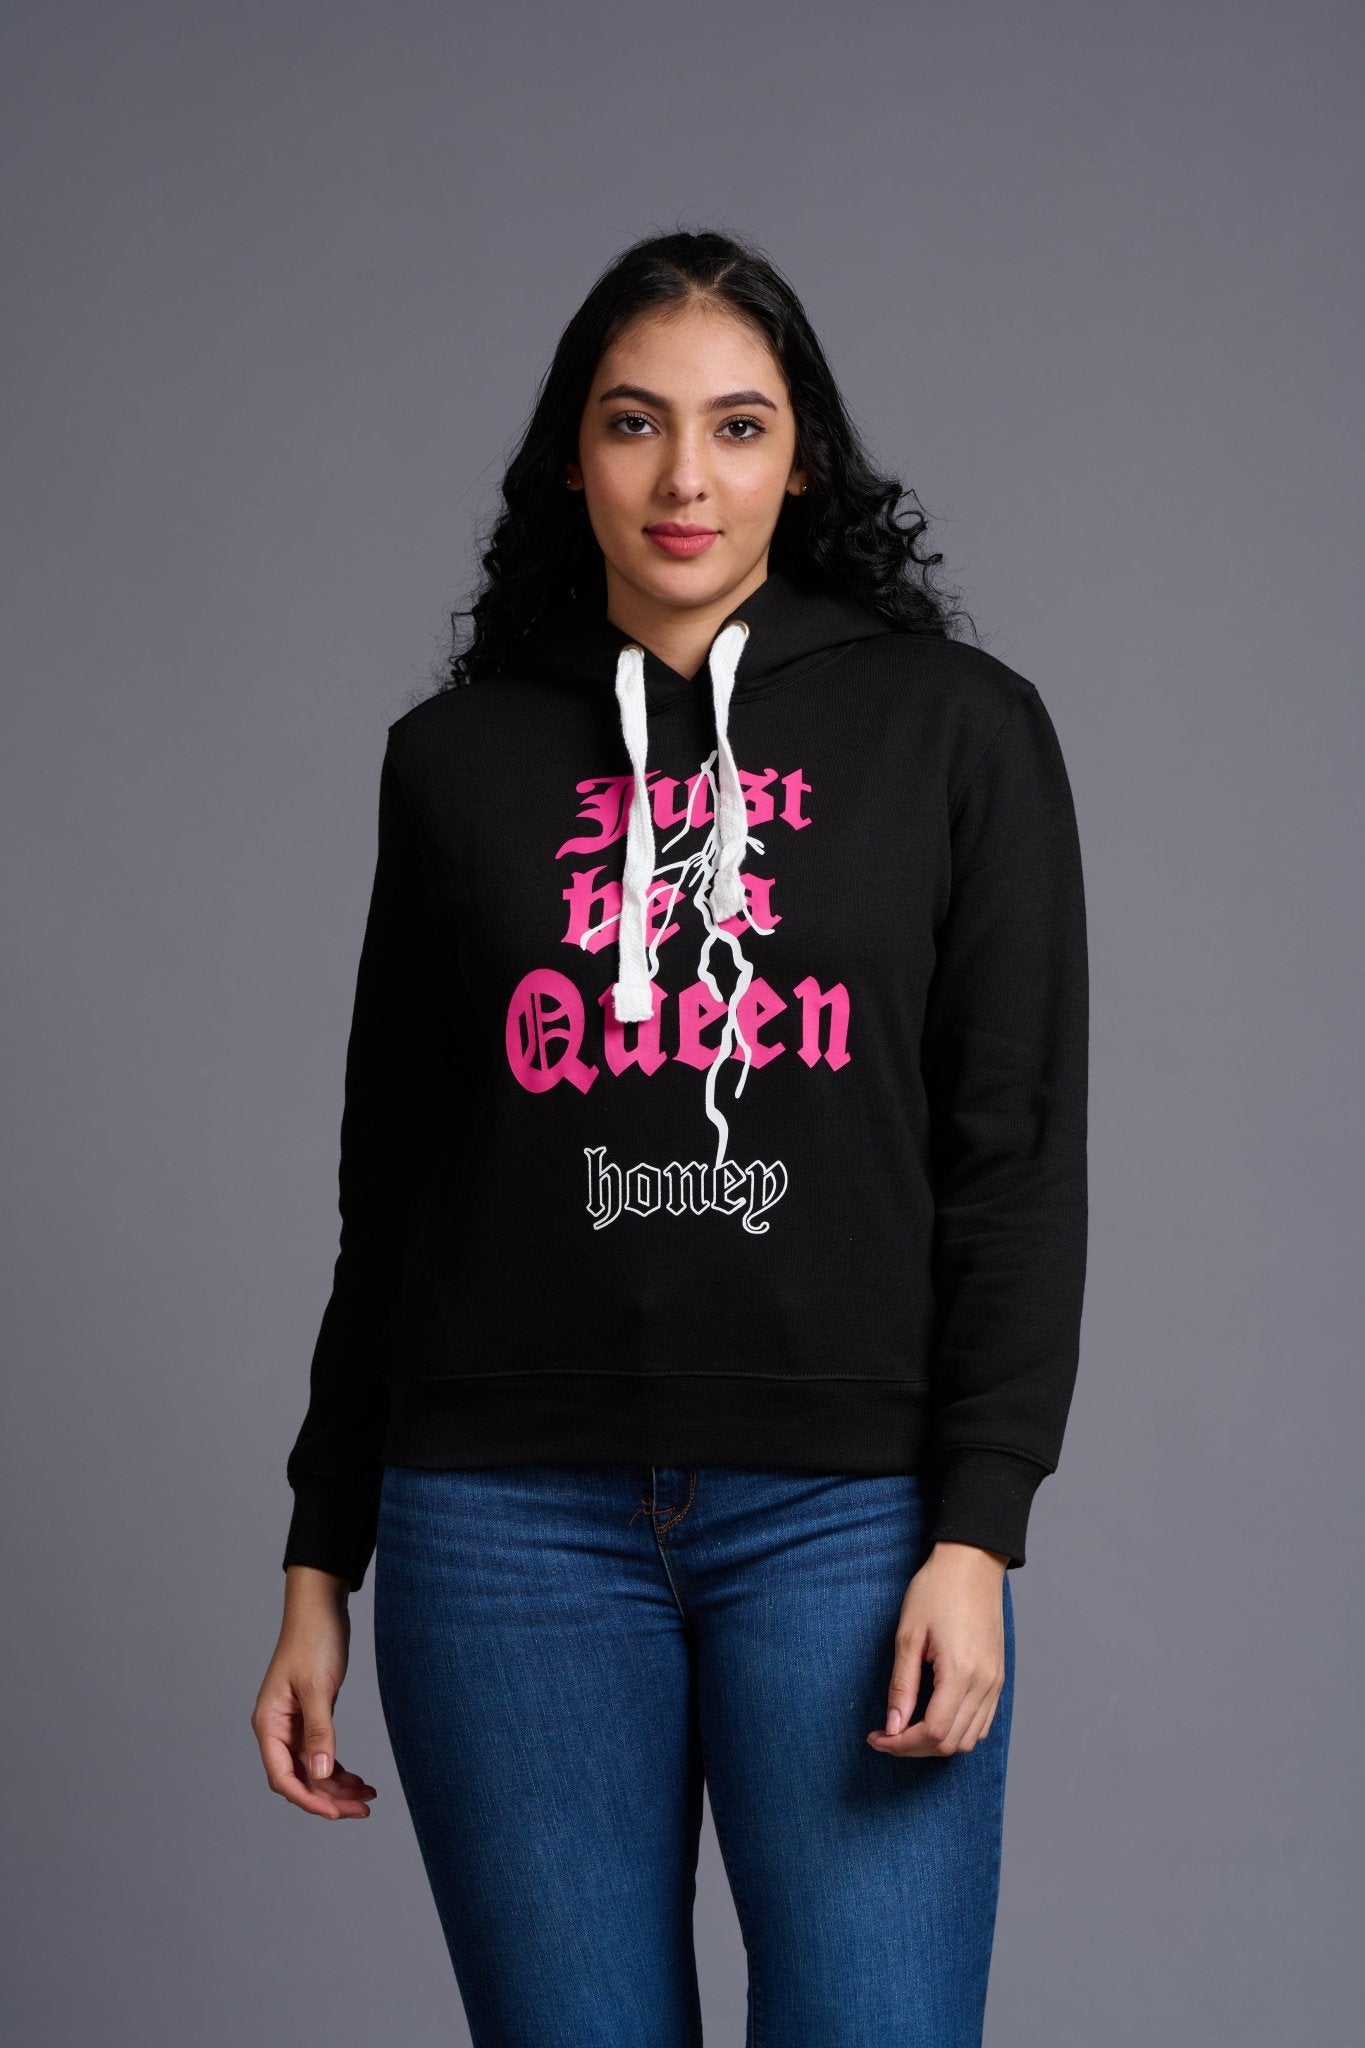 Just Be a Queen Printed Black Hoodie for Women - Go Devil